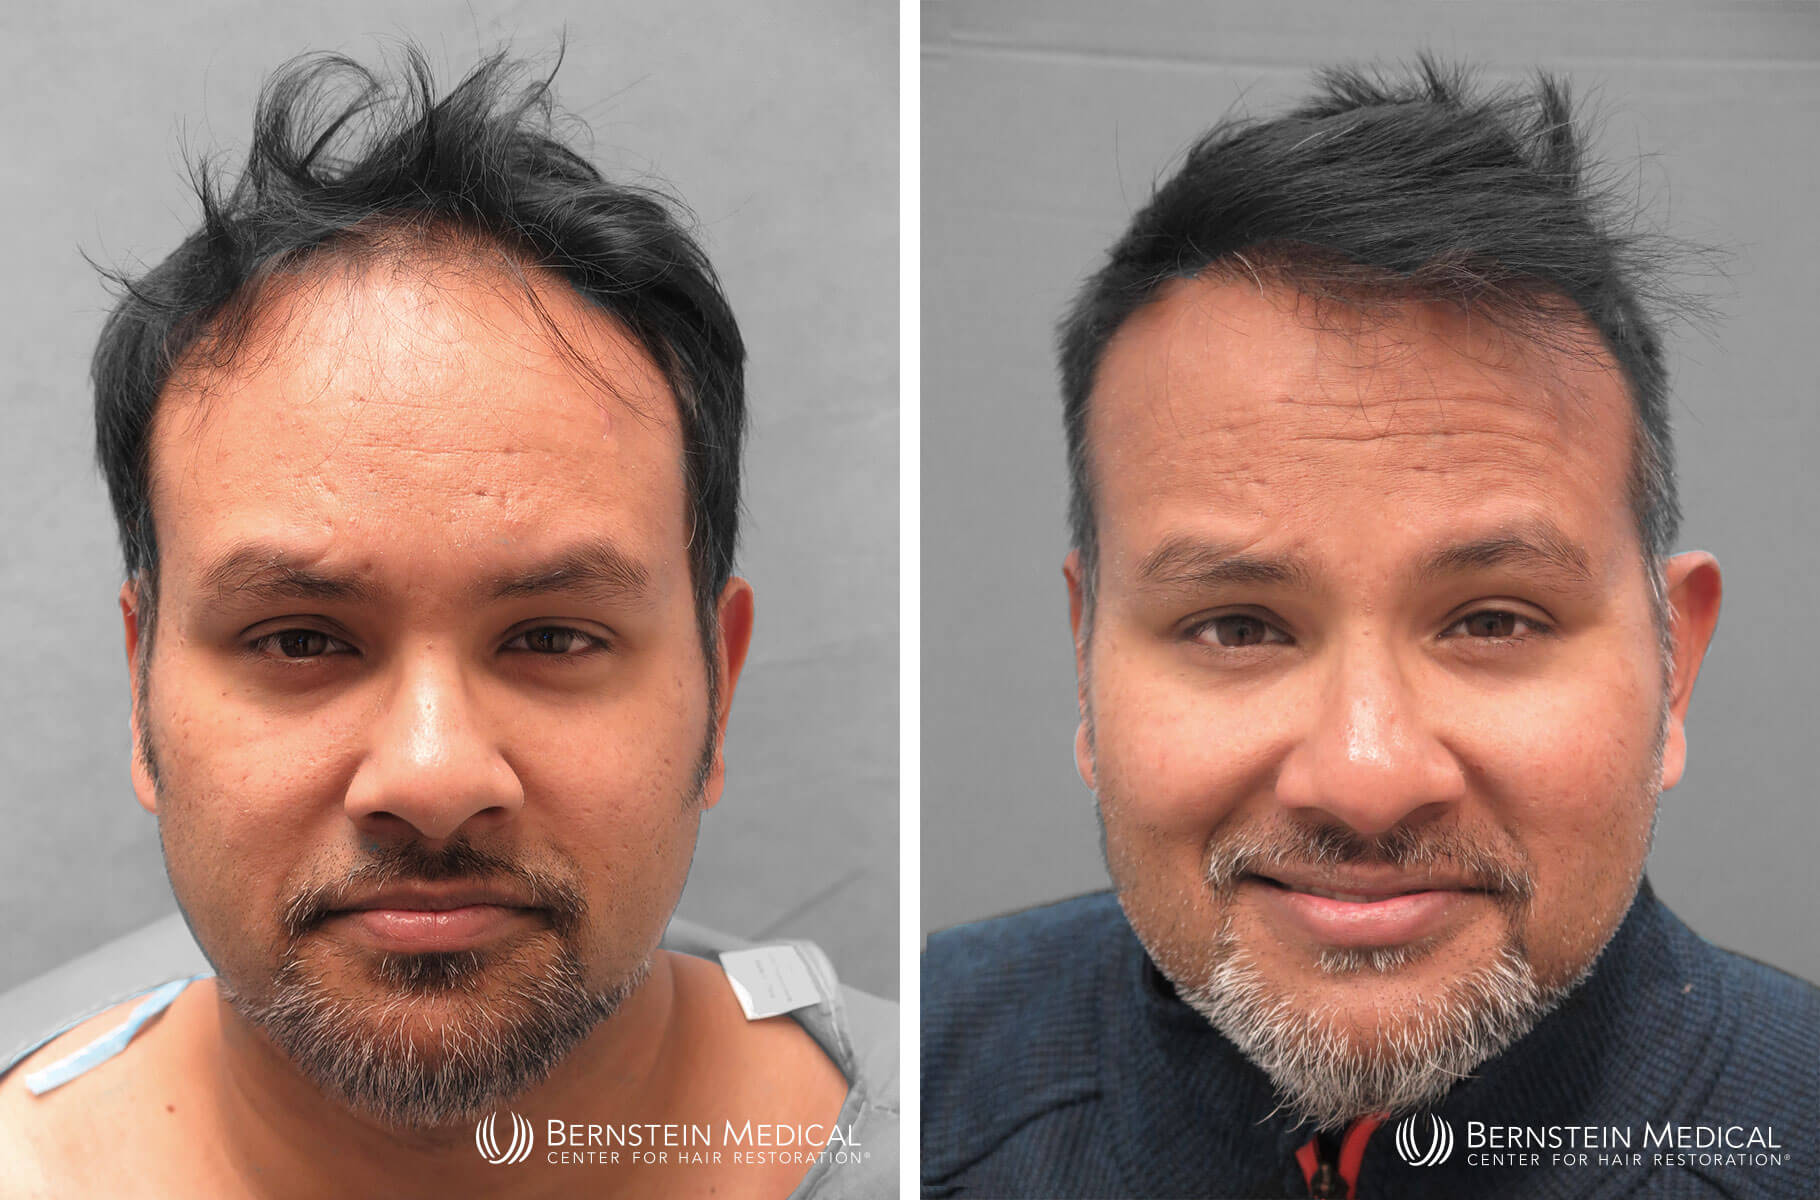 Bernstein Medical - Patient RBJ Before and After Hair Transplant Photo 